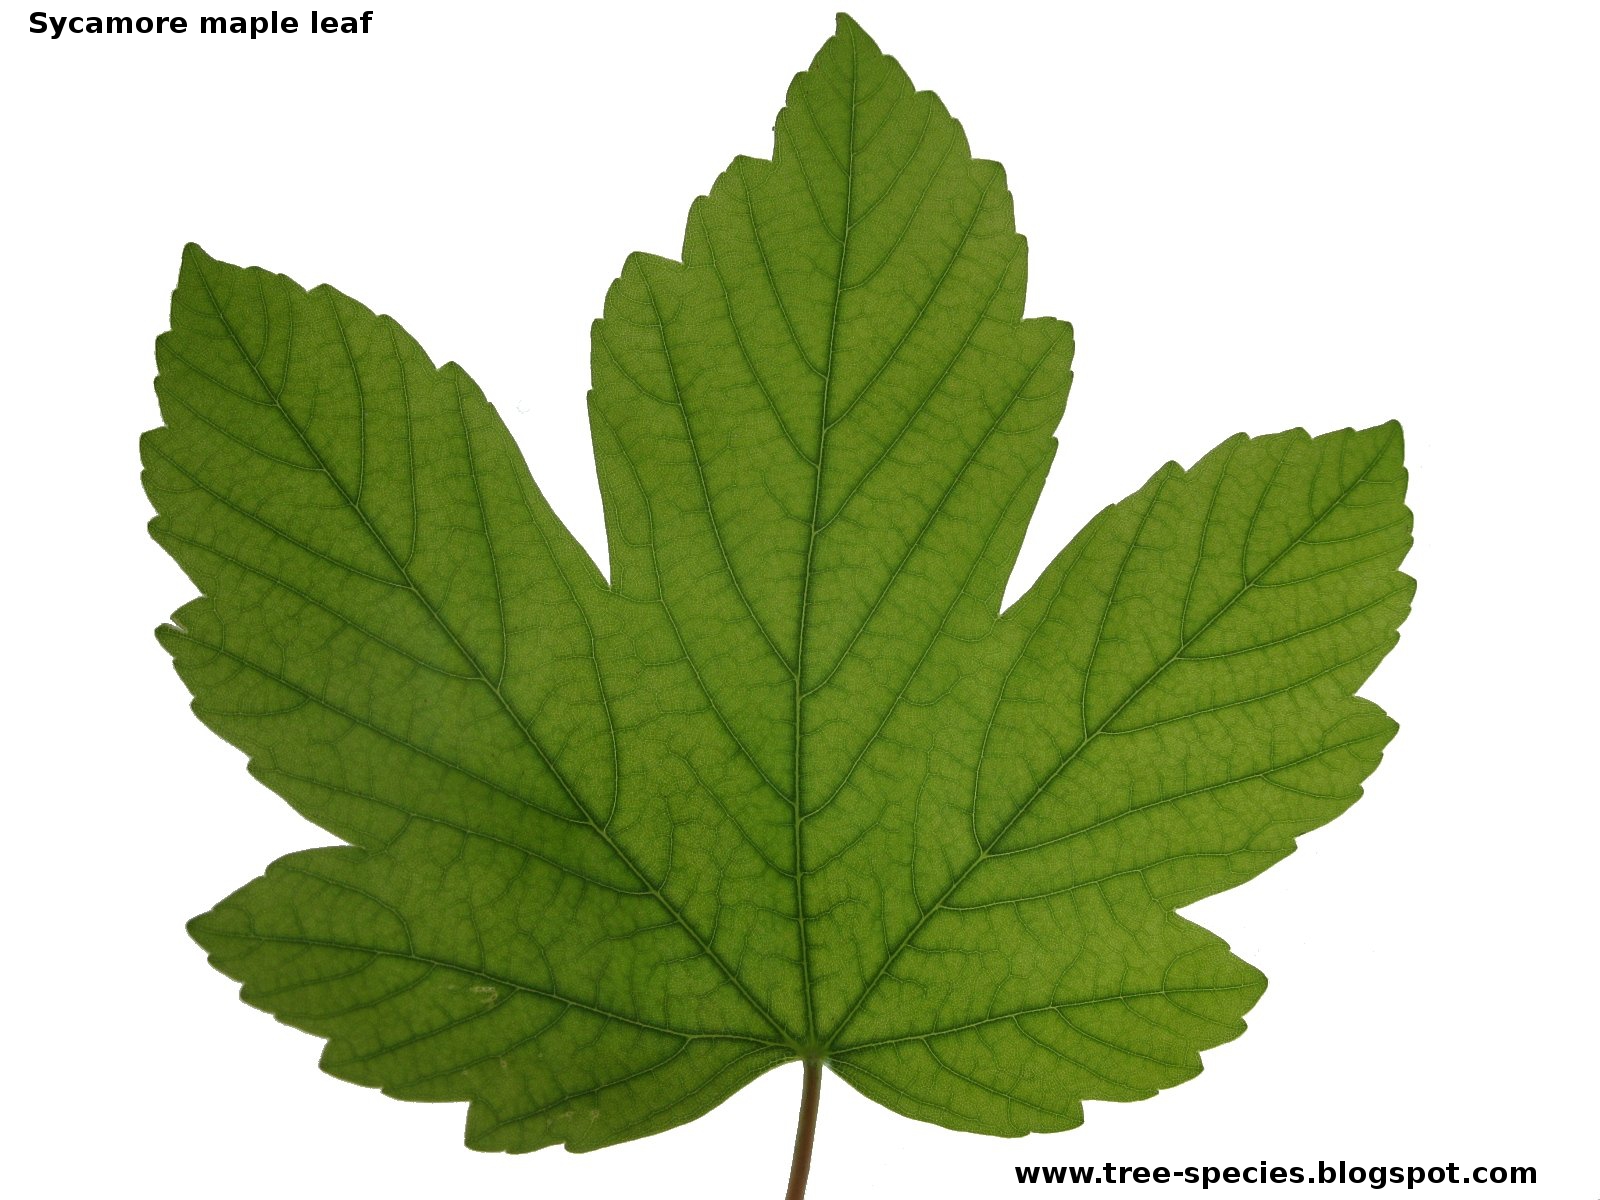 The World´s Tree Species: Sycamore maple leaf